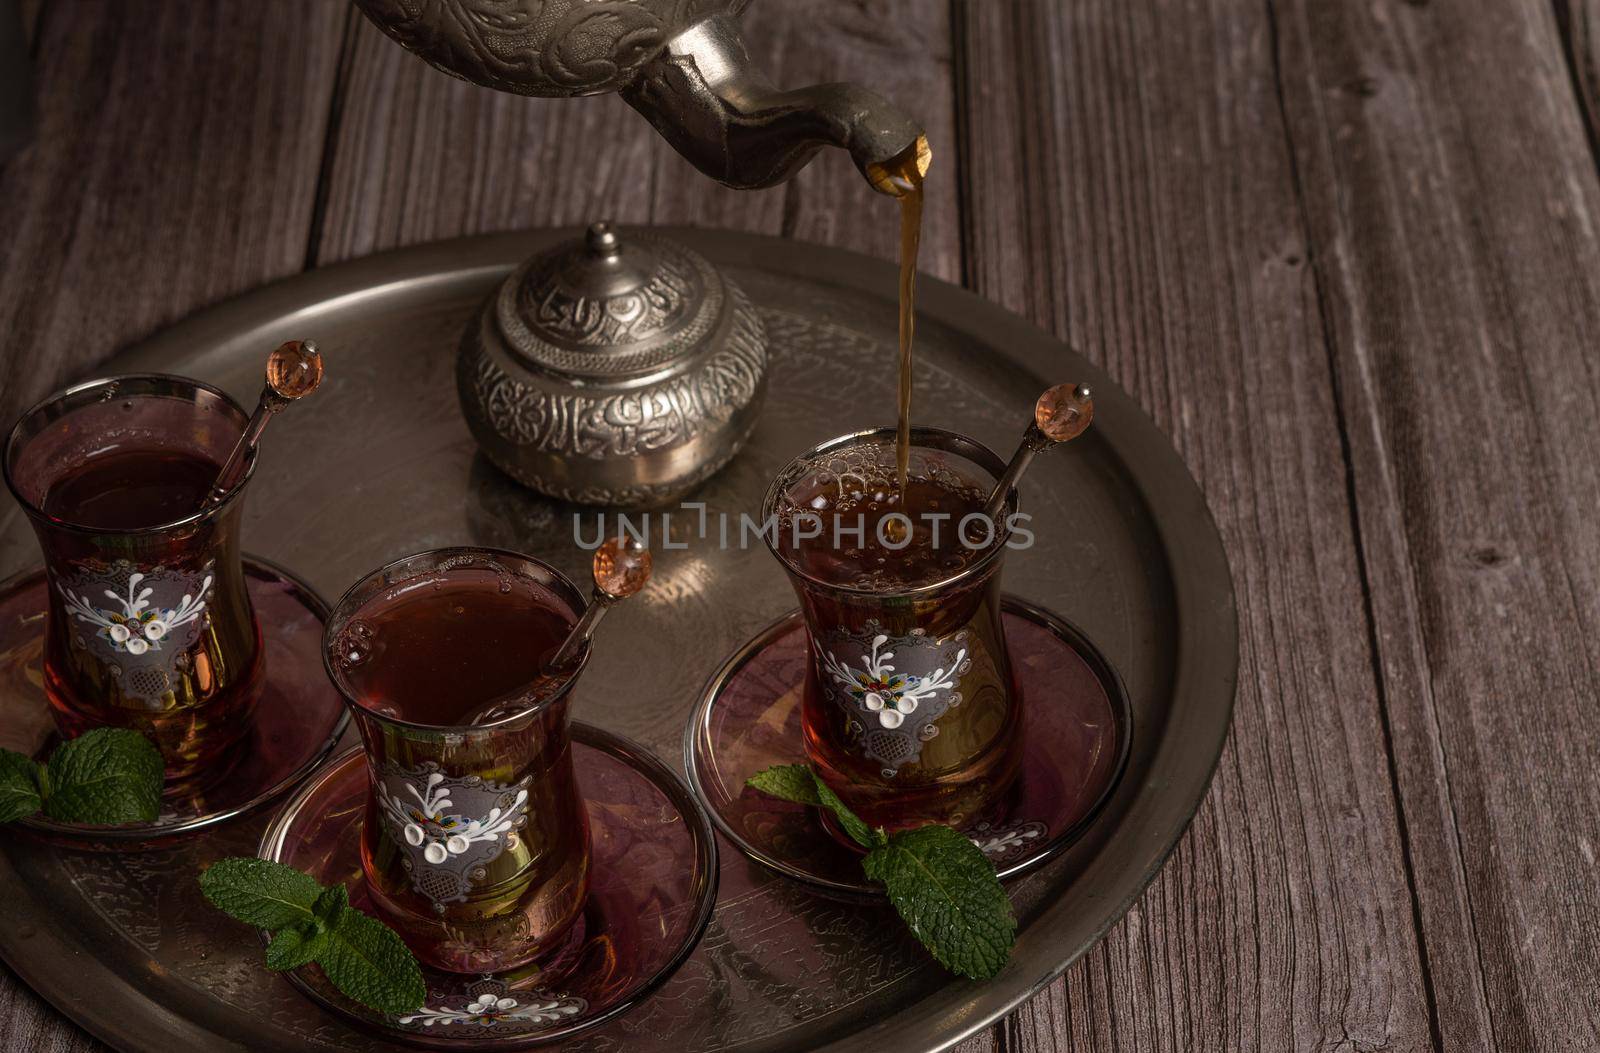 serving hot Moorish tea on a tray with glasses and pitcher on a wooden table